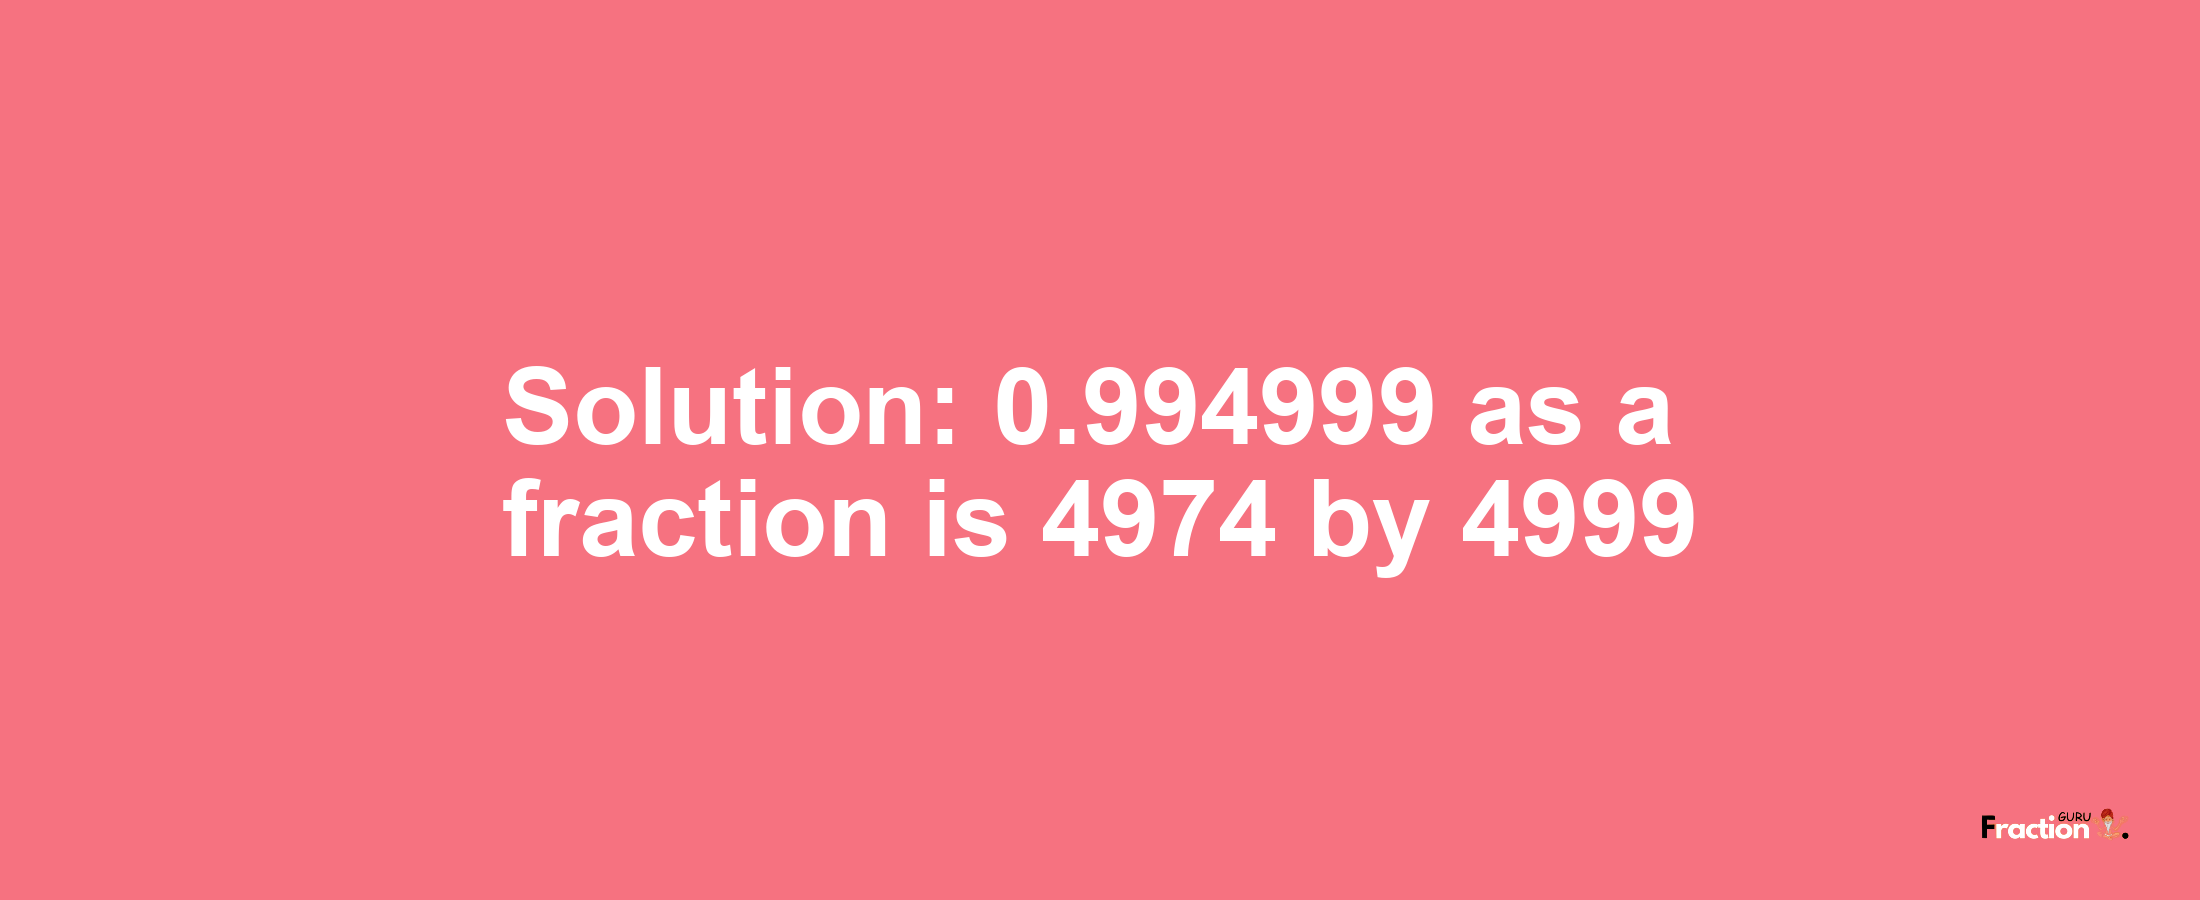 Solution:0.994999 as a fraction is 4974/4999